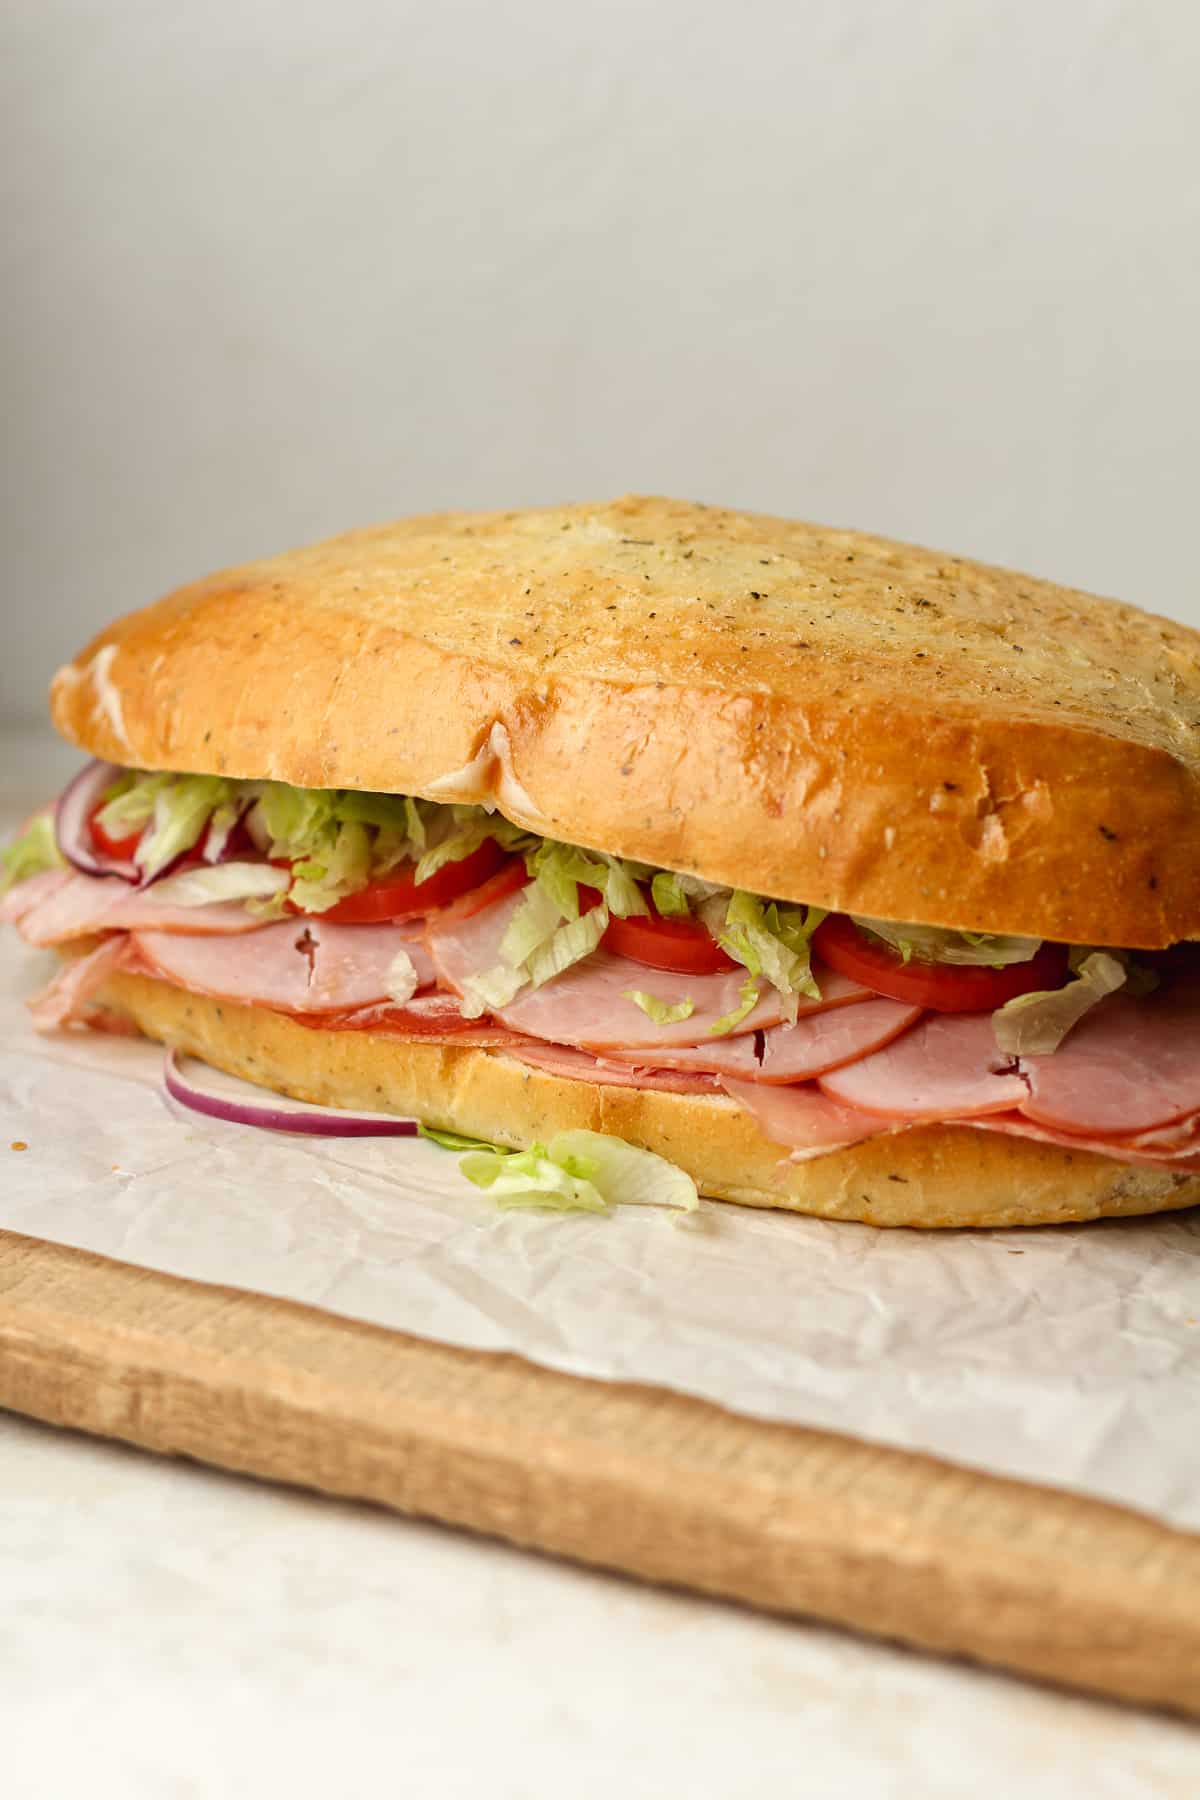 Side view of a large Italian sub sandwich, with layers of Italian meats and cheese, with lettuce and tomato.